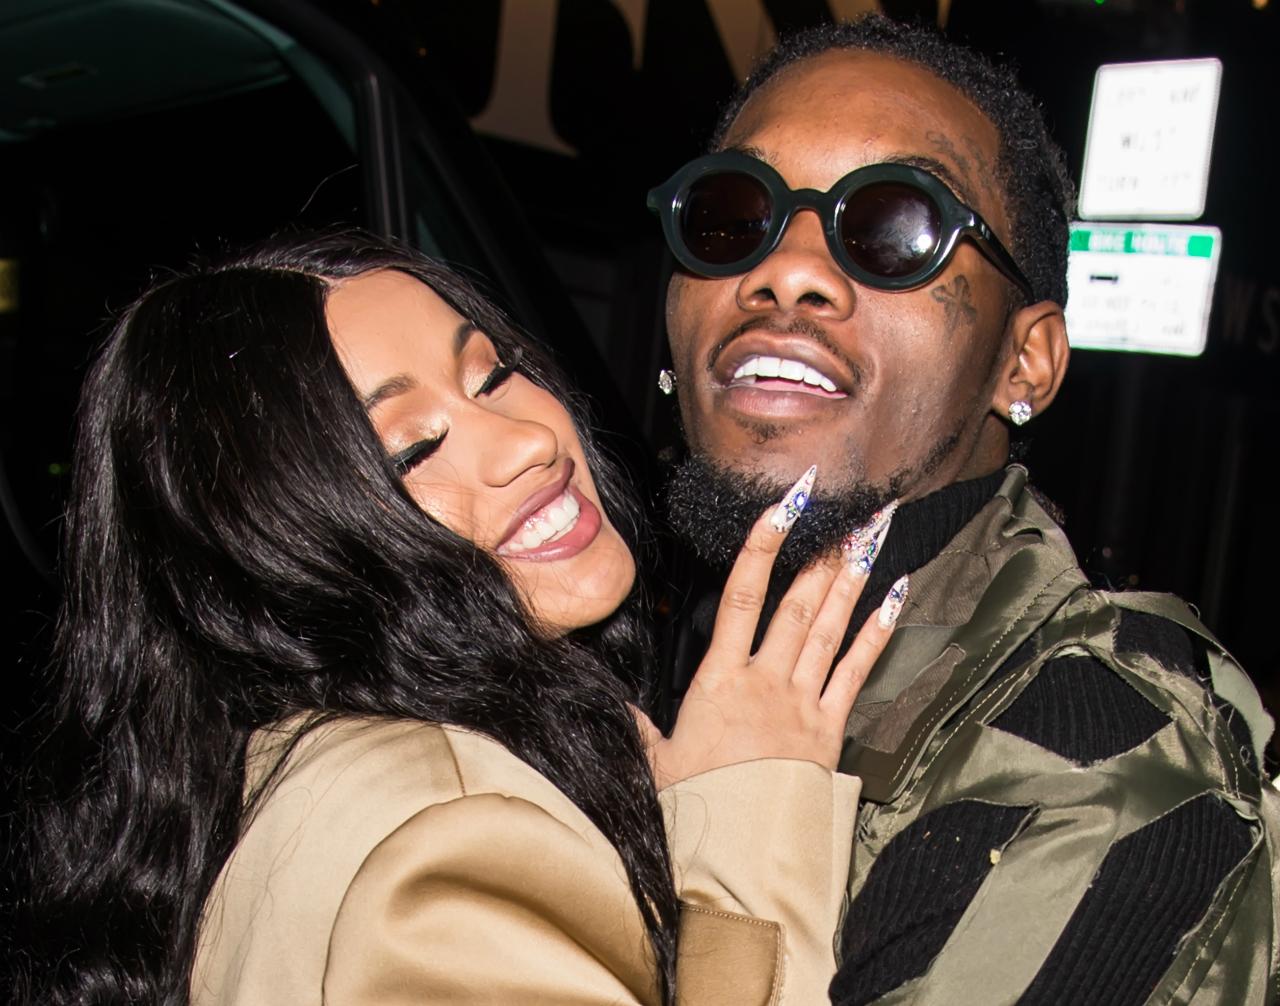 Cardi B and Offset smiling and hugging